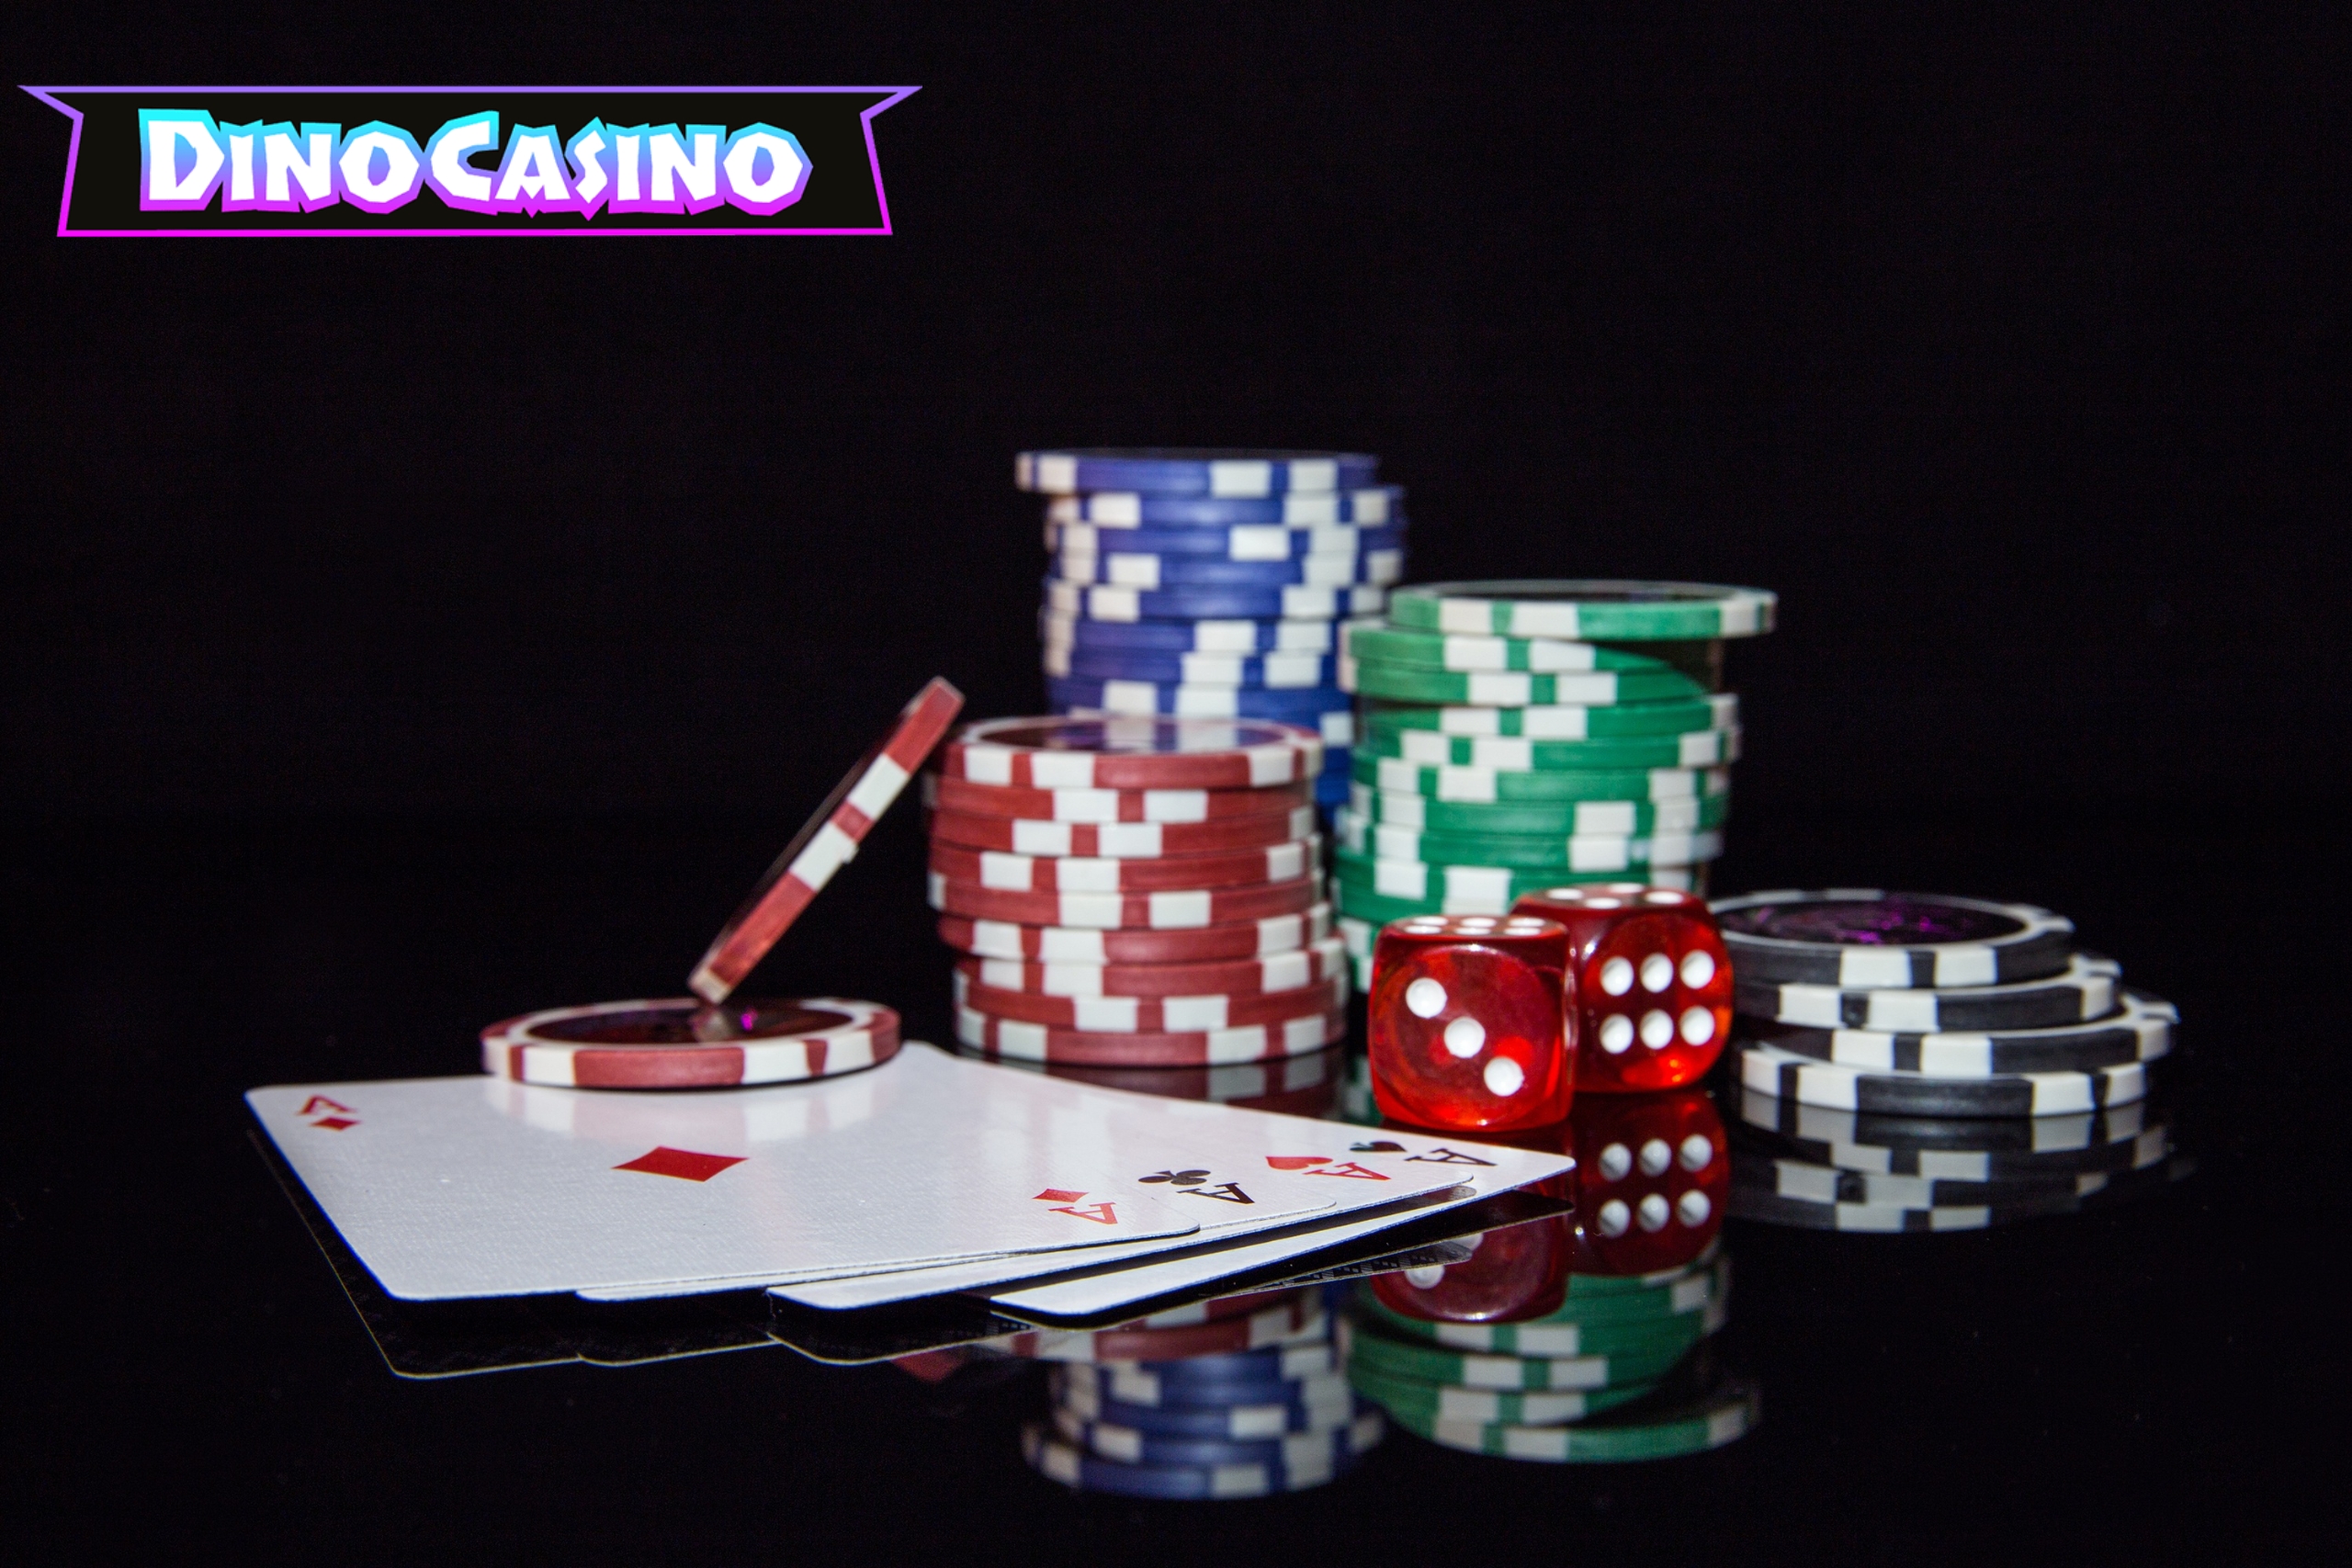 Discover Online Casino Games: Slots, Table Games, and More